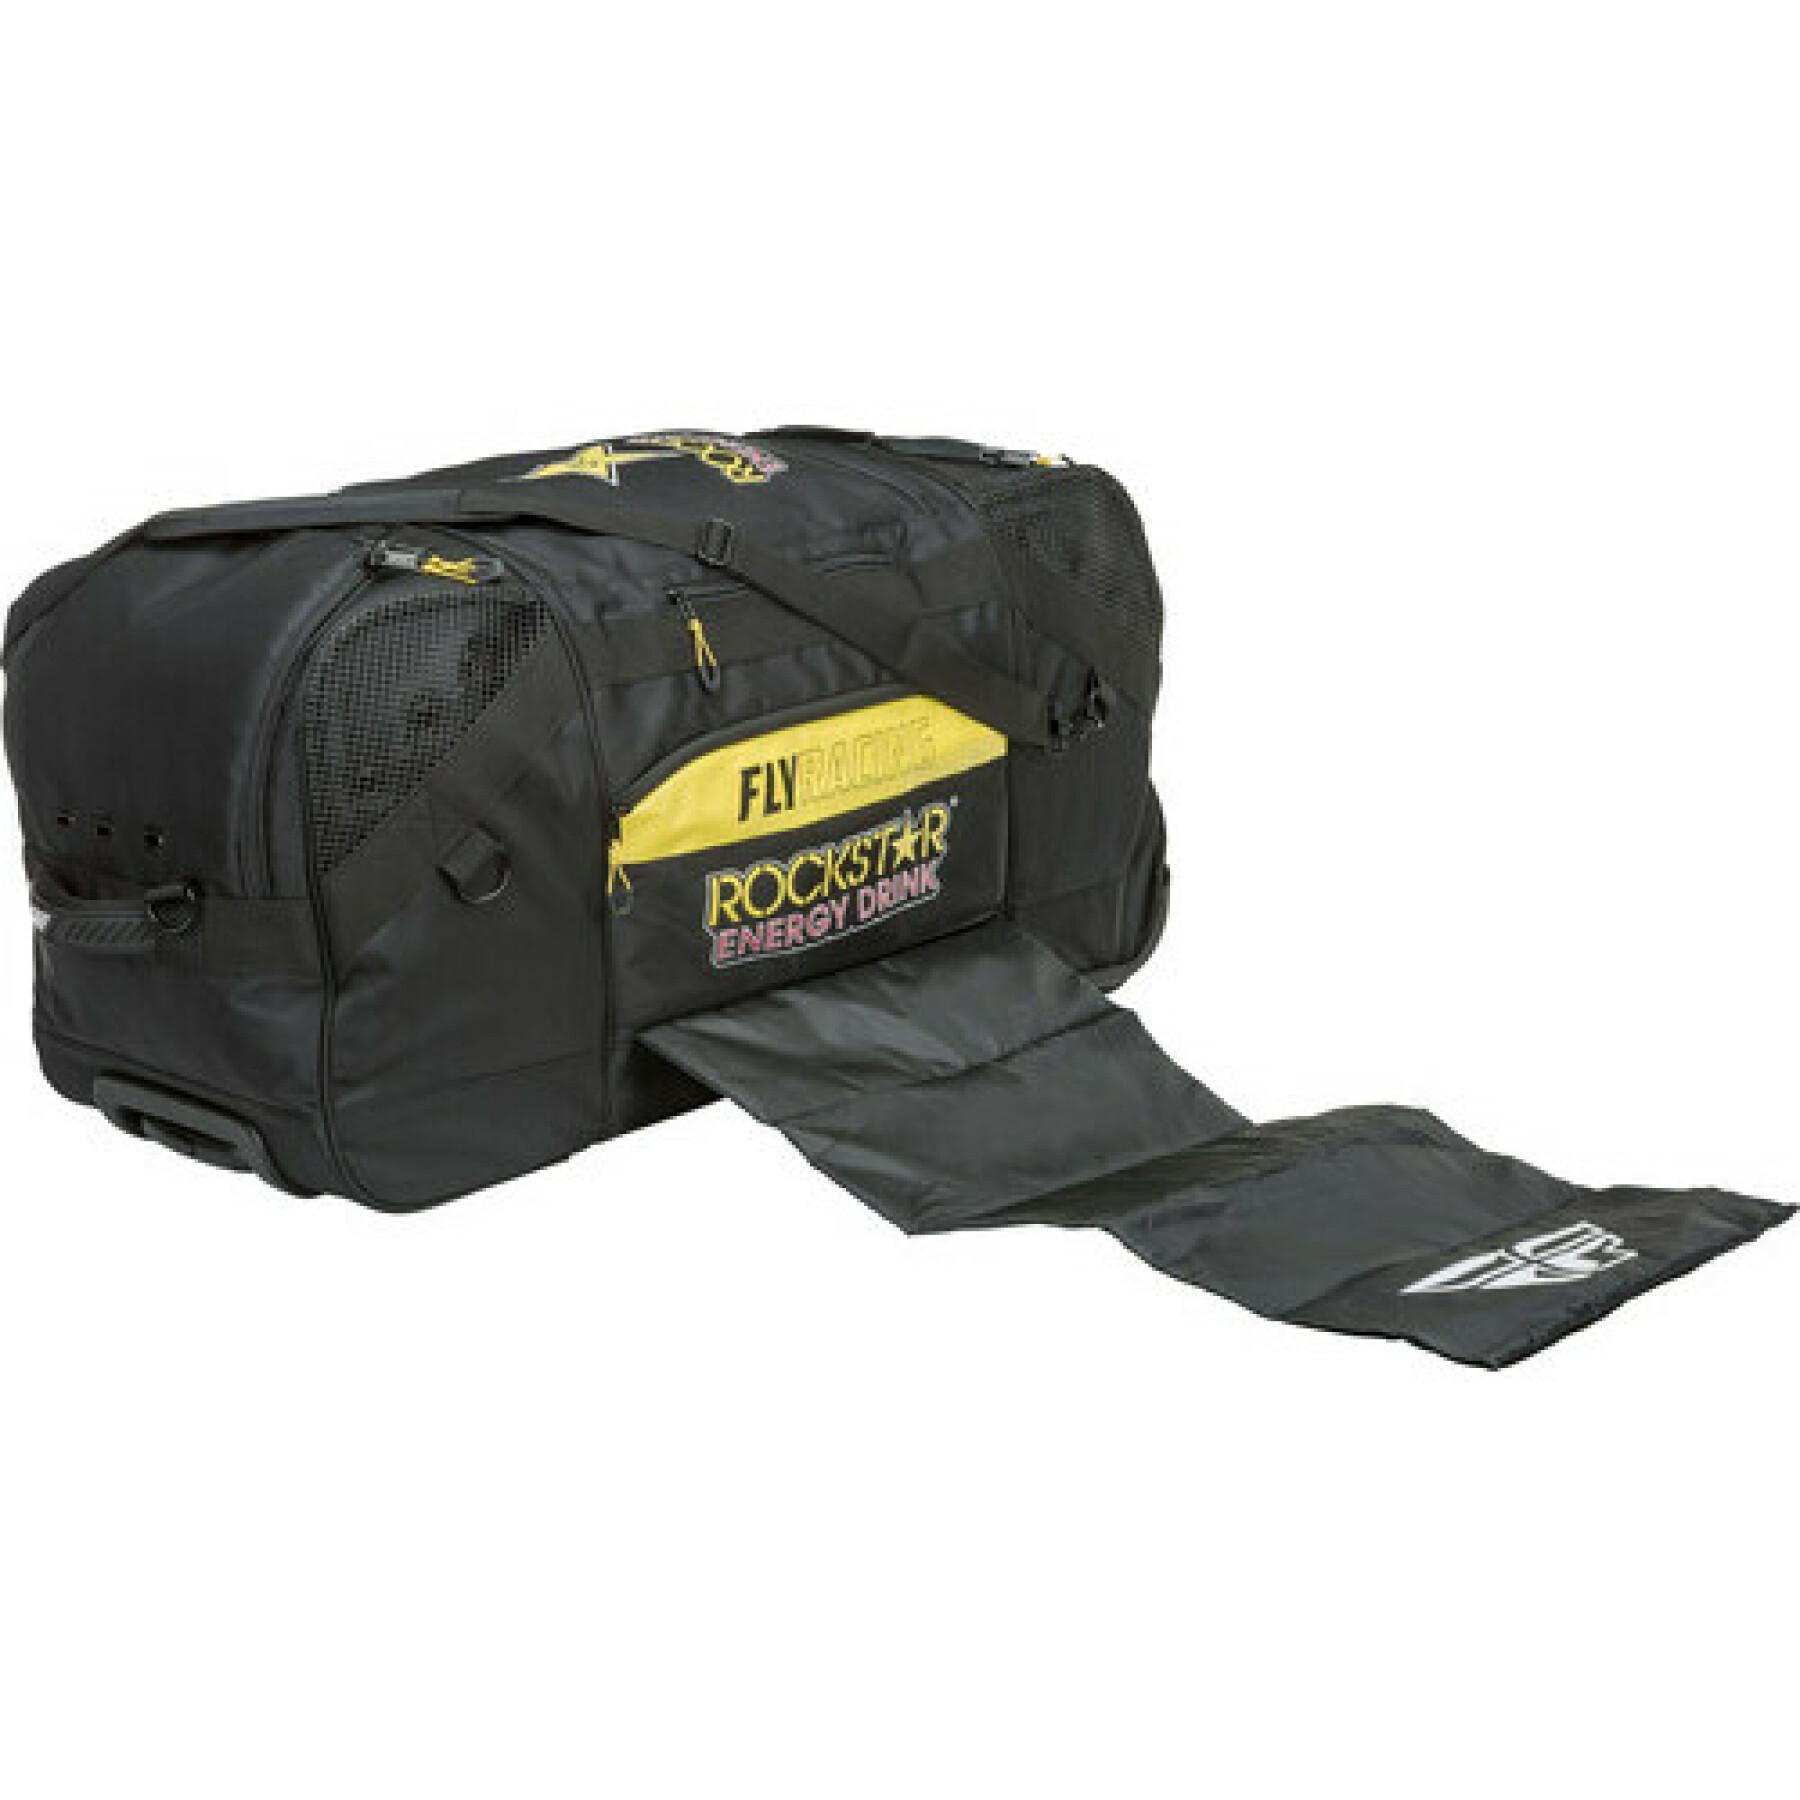 Large rolling luggage Fly Racing Rockstar